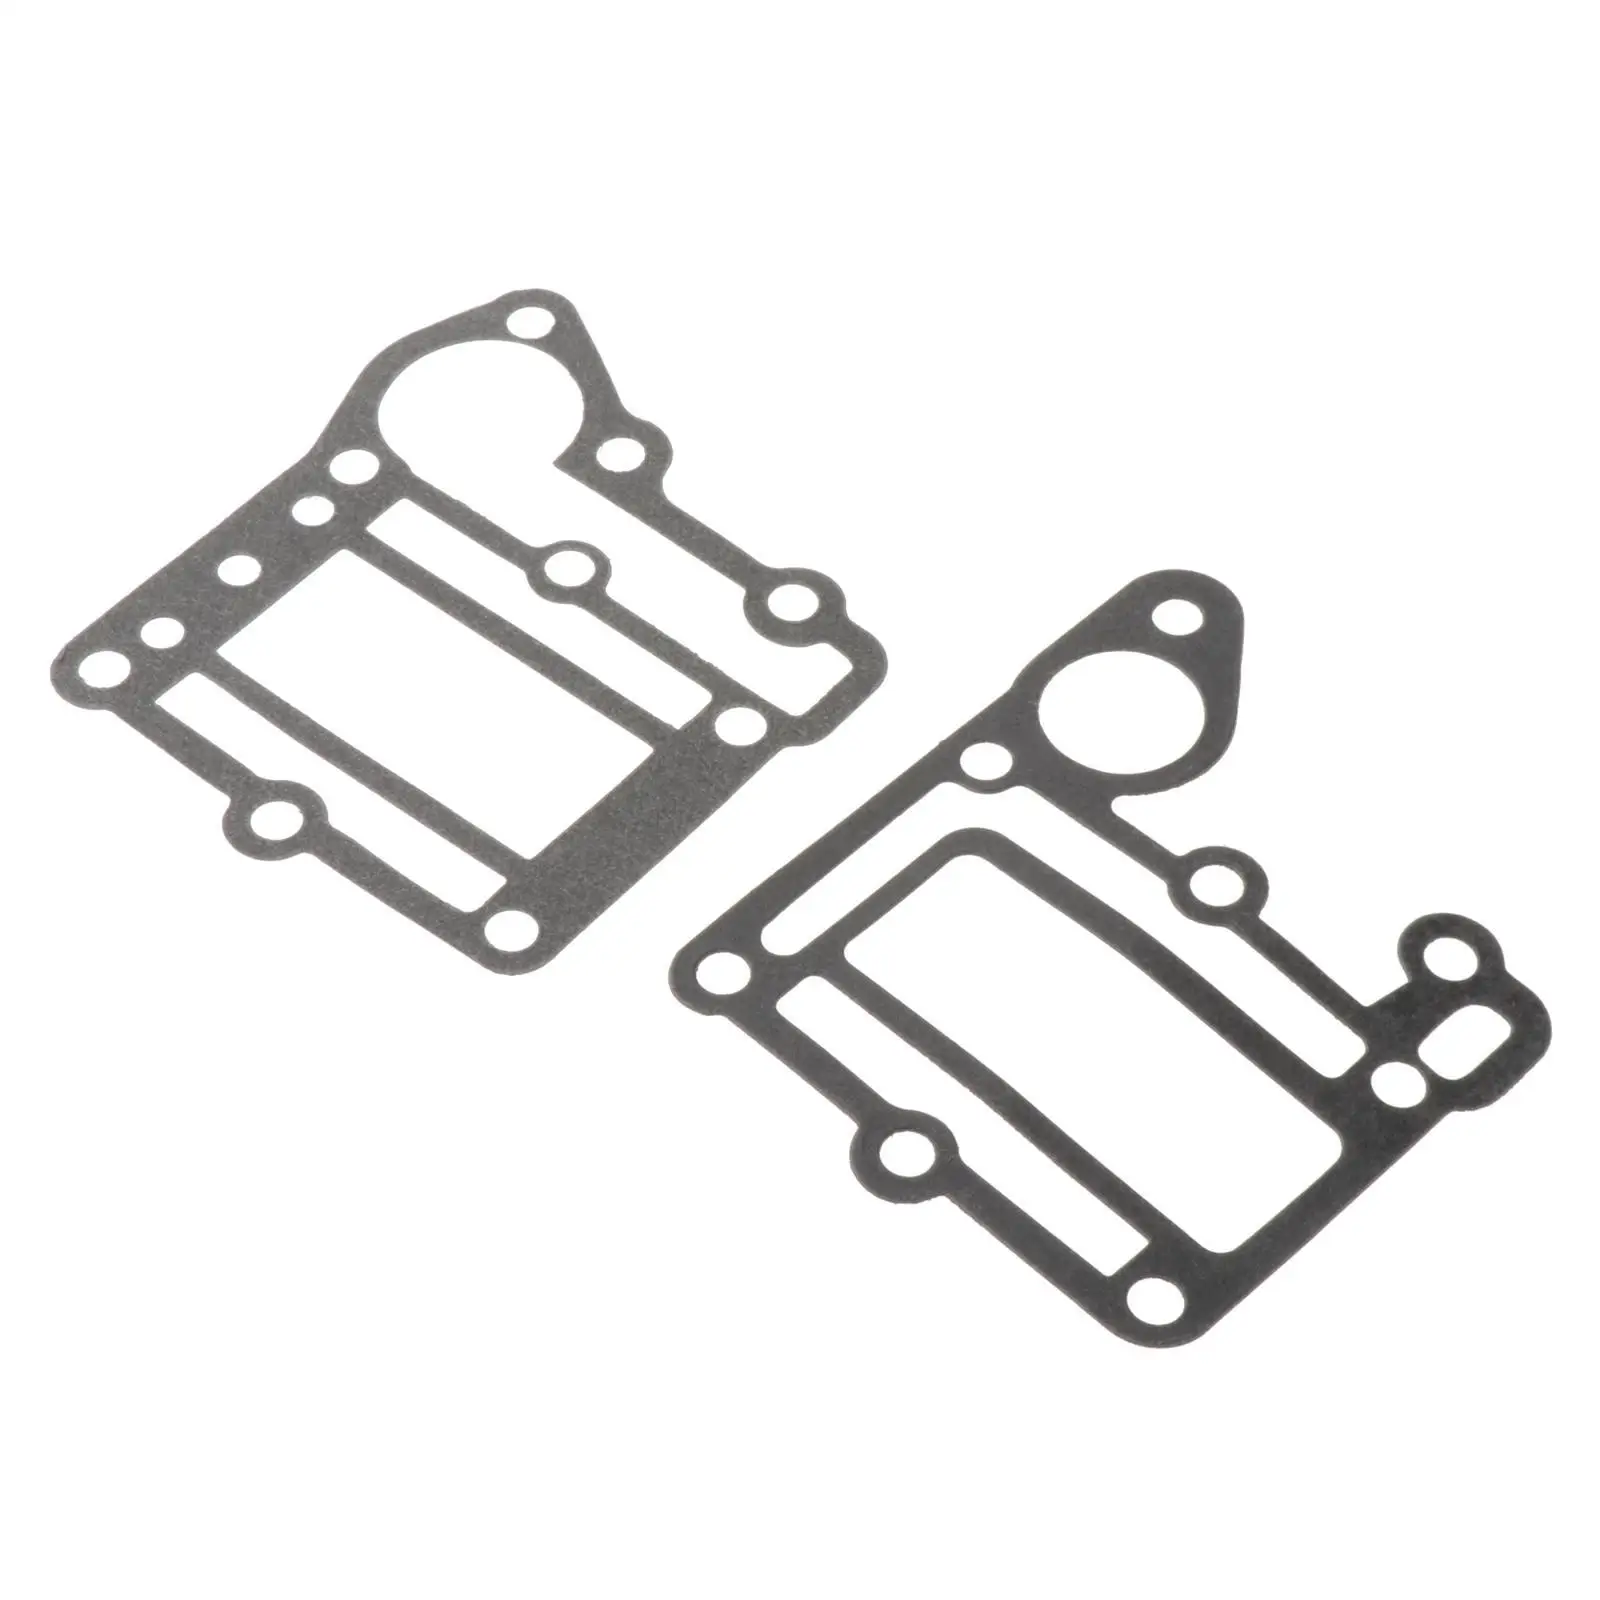 2x Exhaust Jacket Gasket Kit 6E0-41112-A0 6E0-41114-A0 Exhaust Inner Cover Gasket Fits for 2T 4HP 6E0 Model Outboard Motors